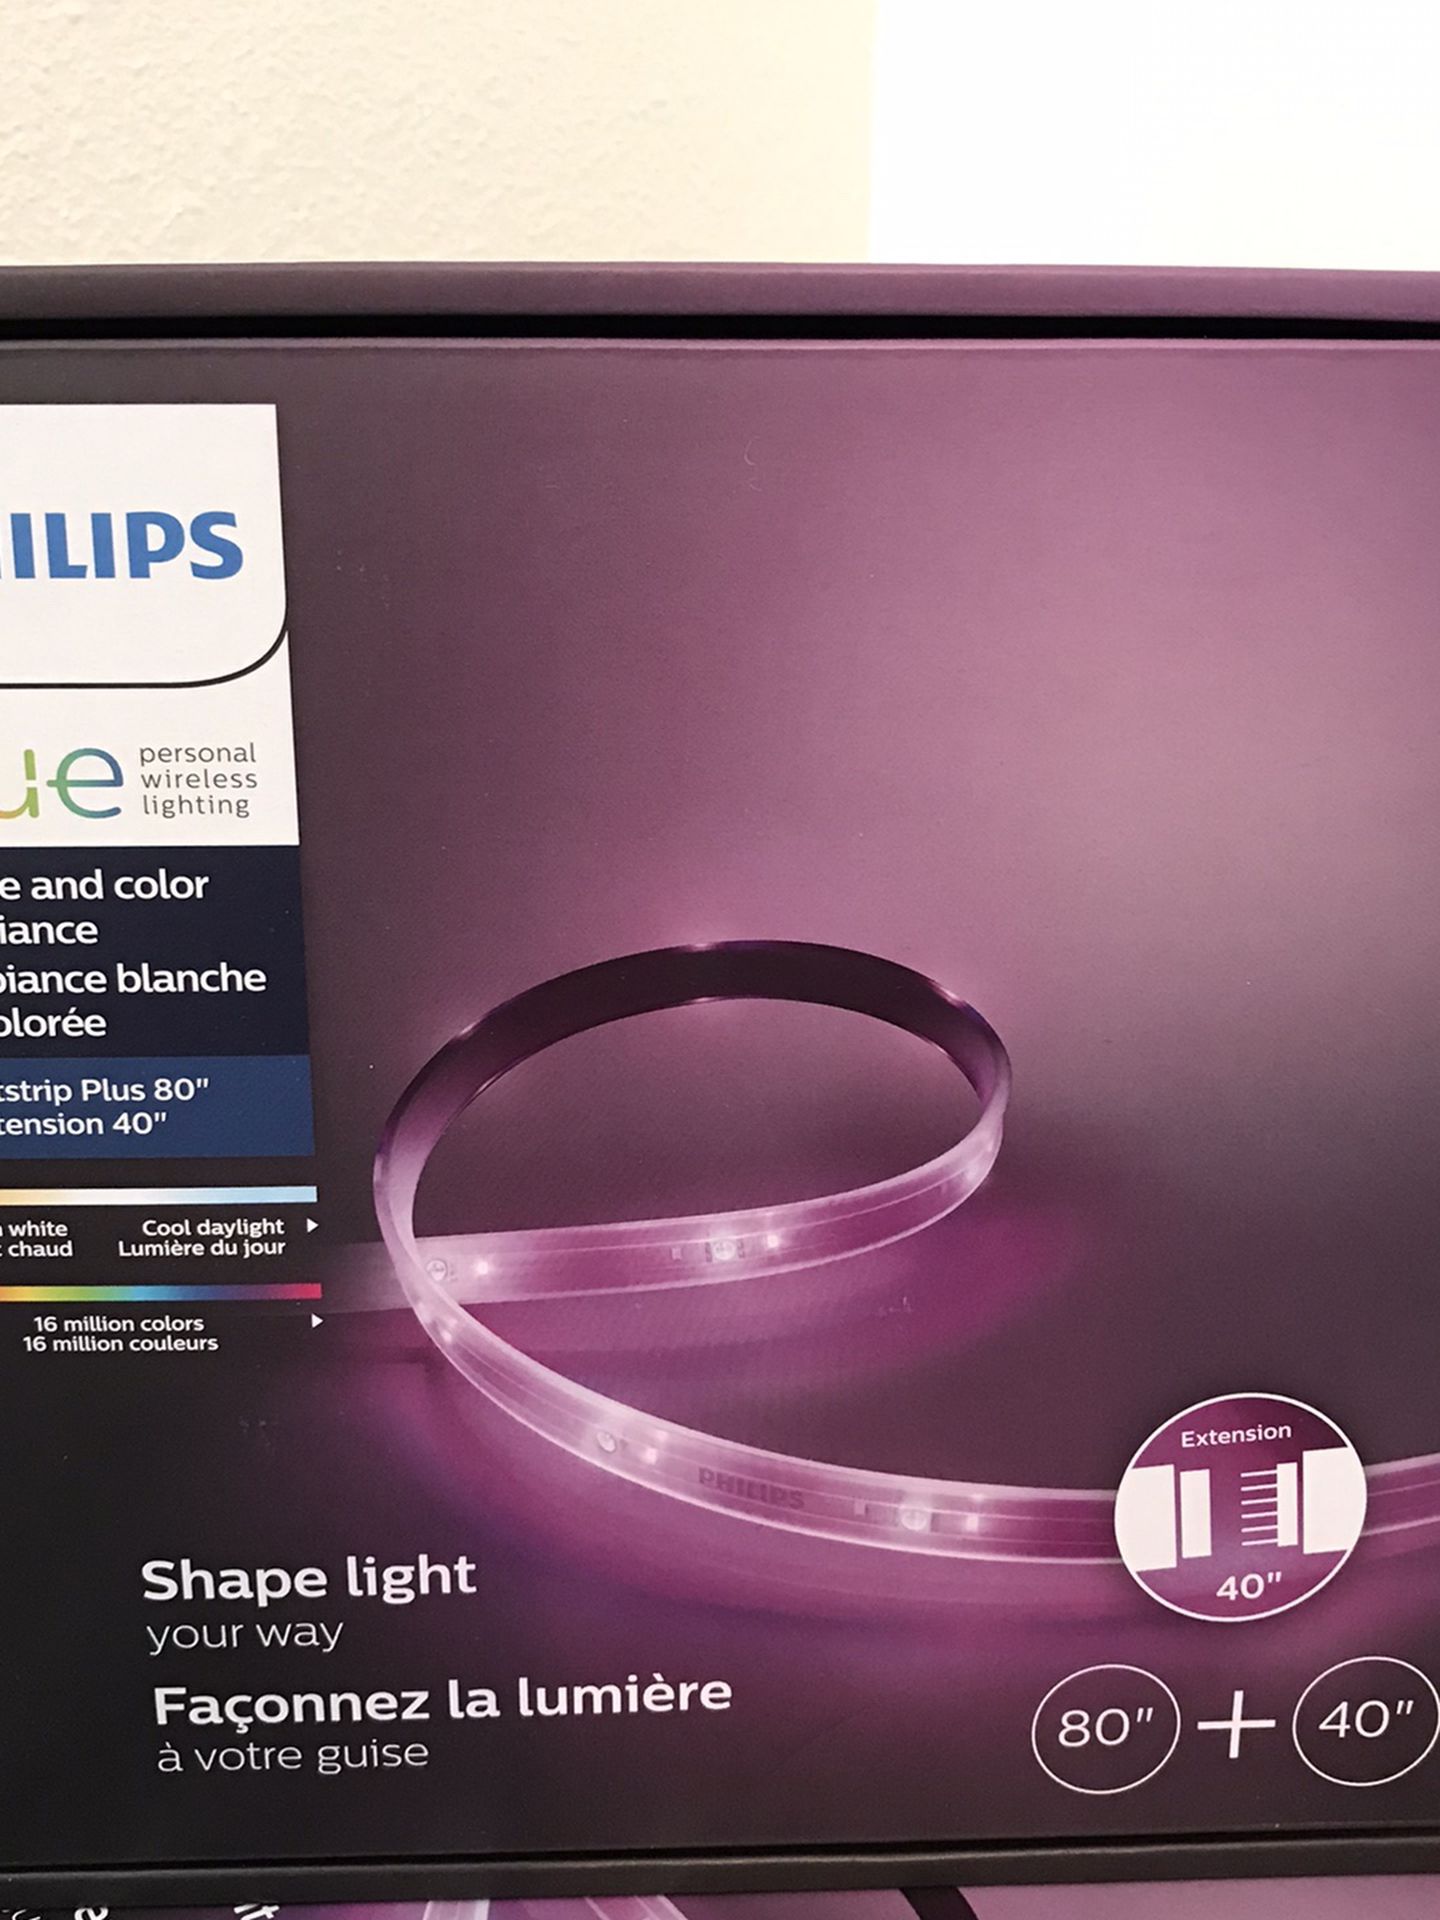 Philips Hue Lightstrip Plus 80”only